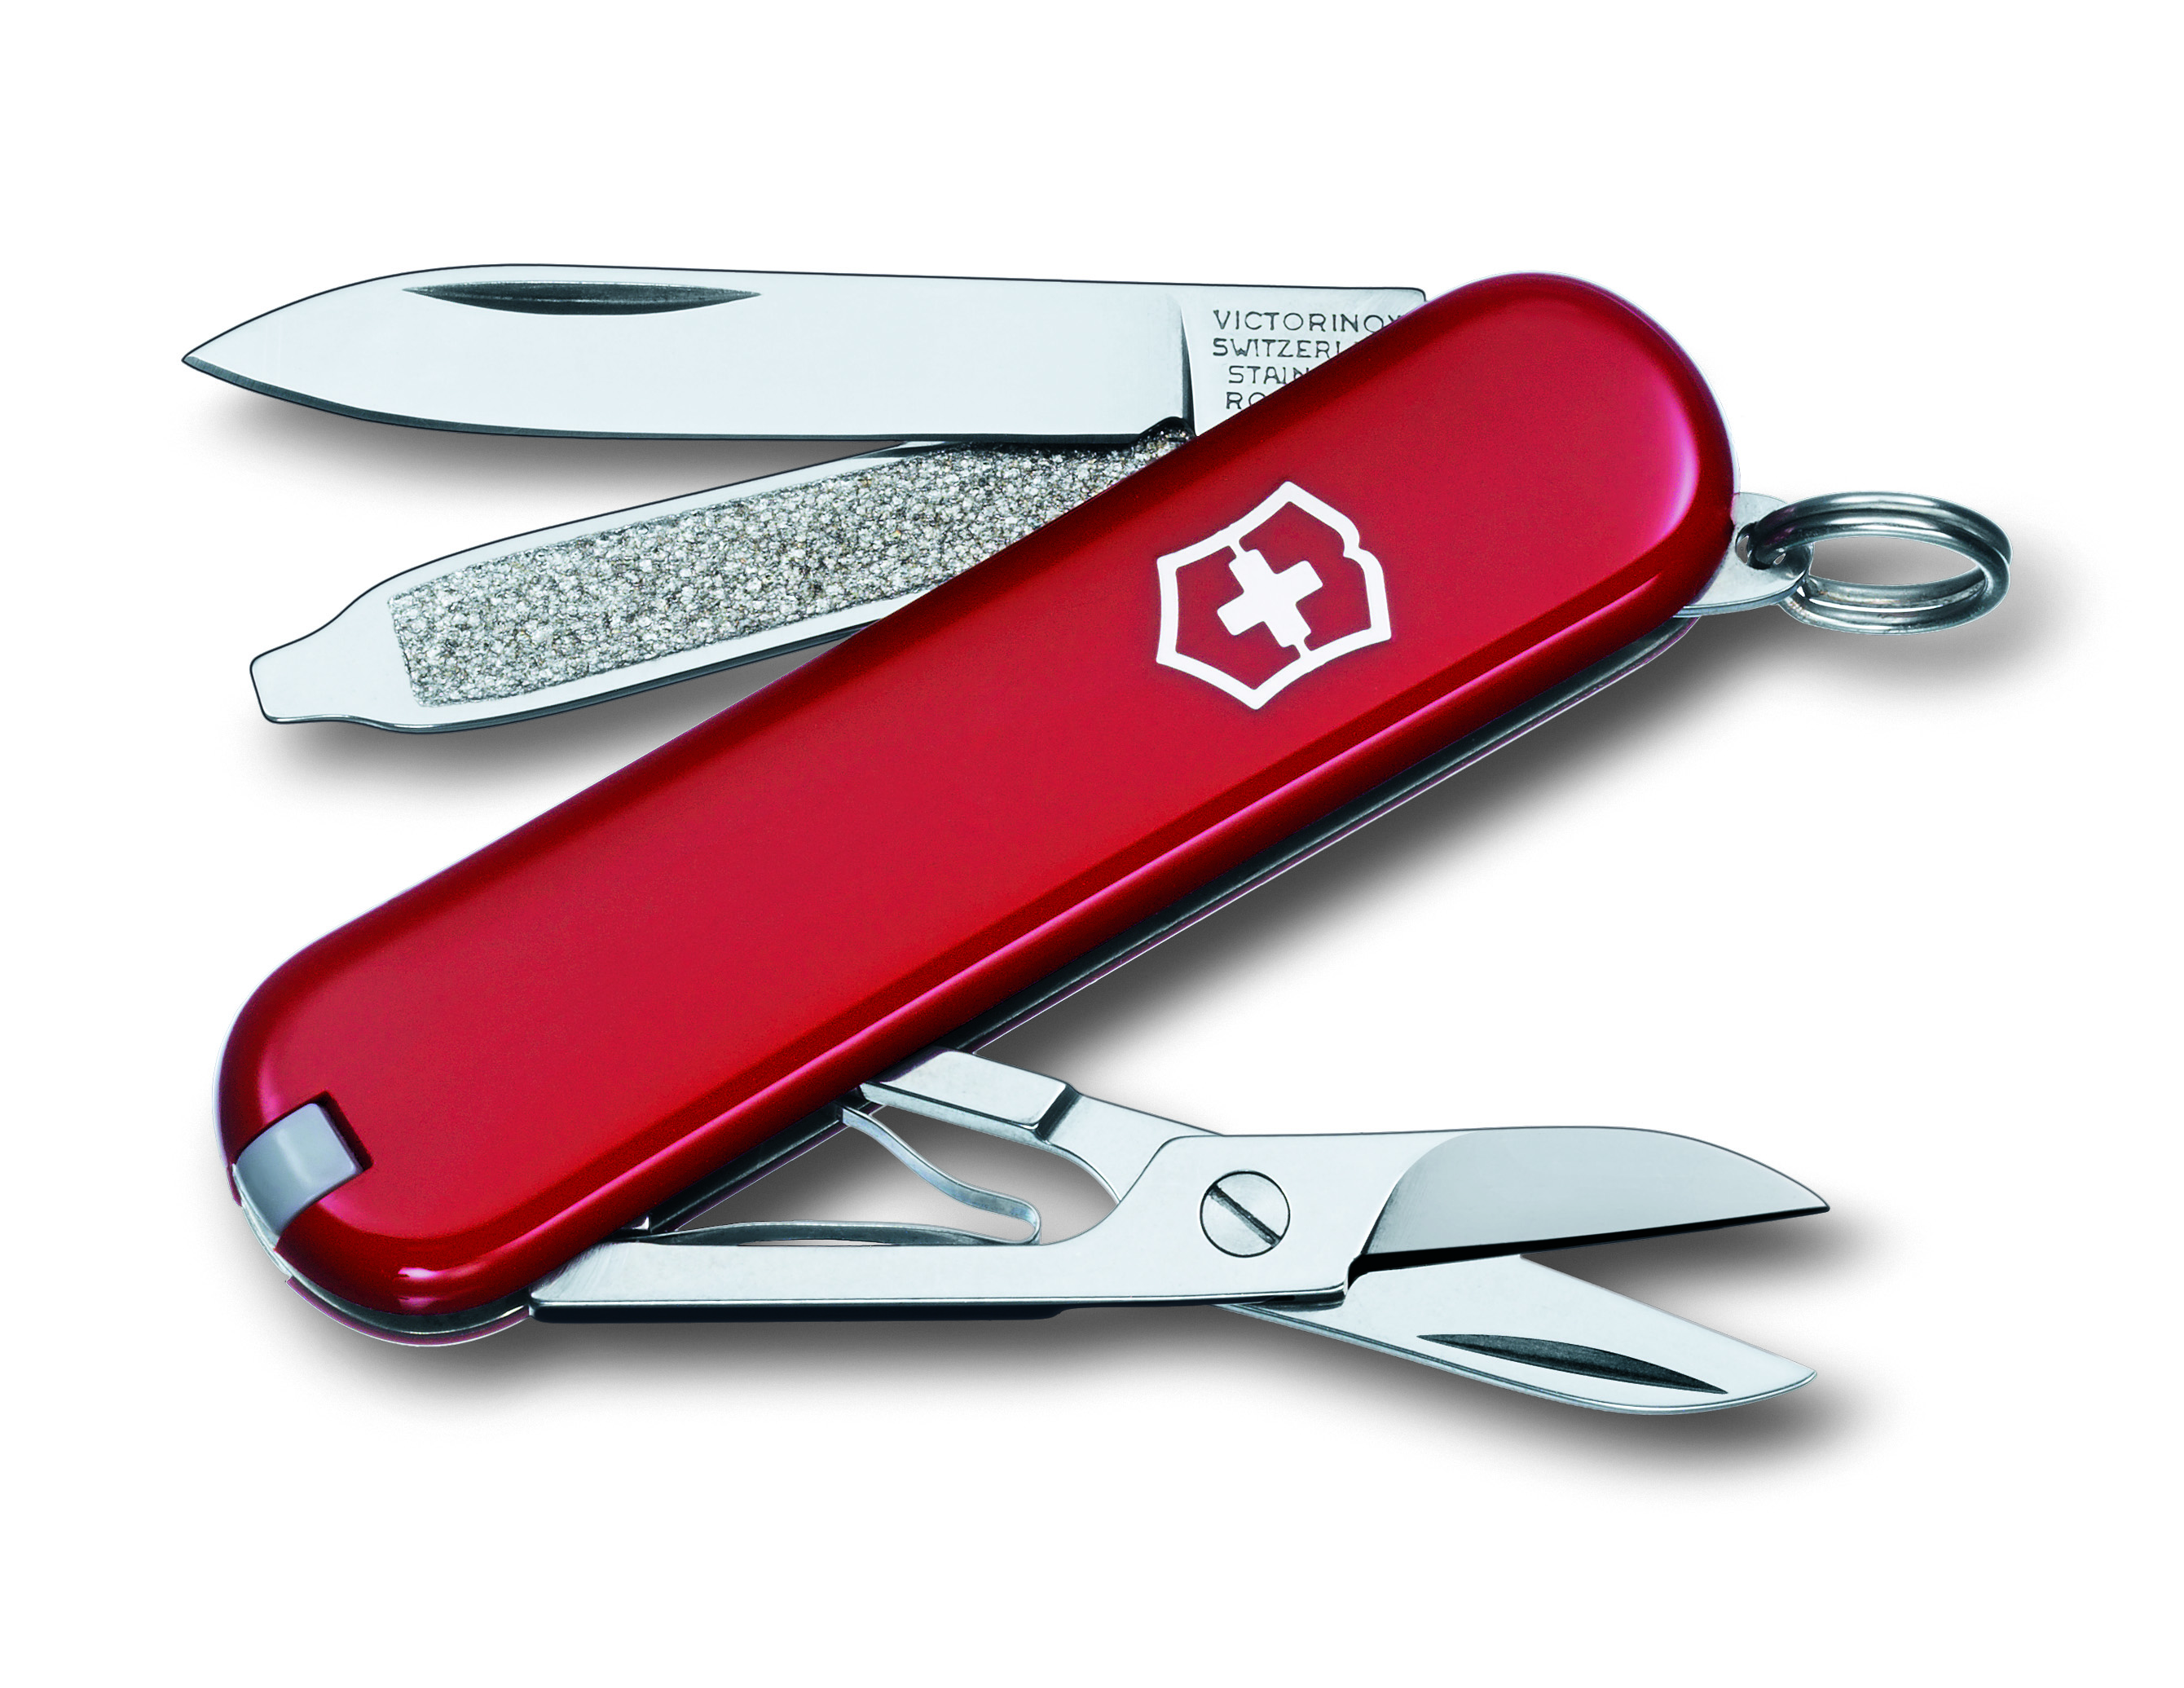 Promotional Victorinox Classic SD Swiss Army Knife